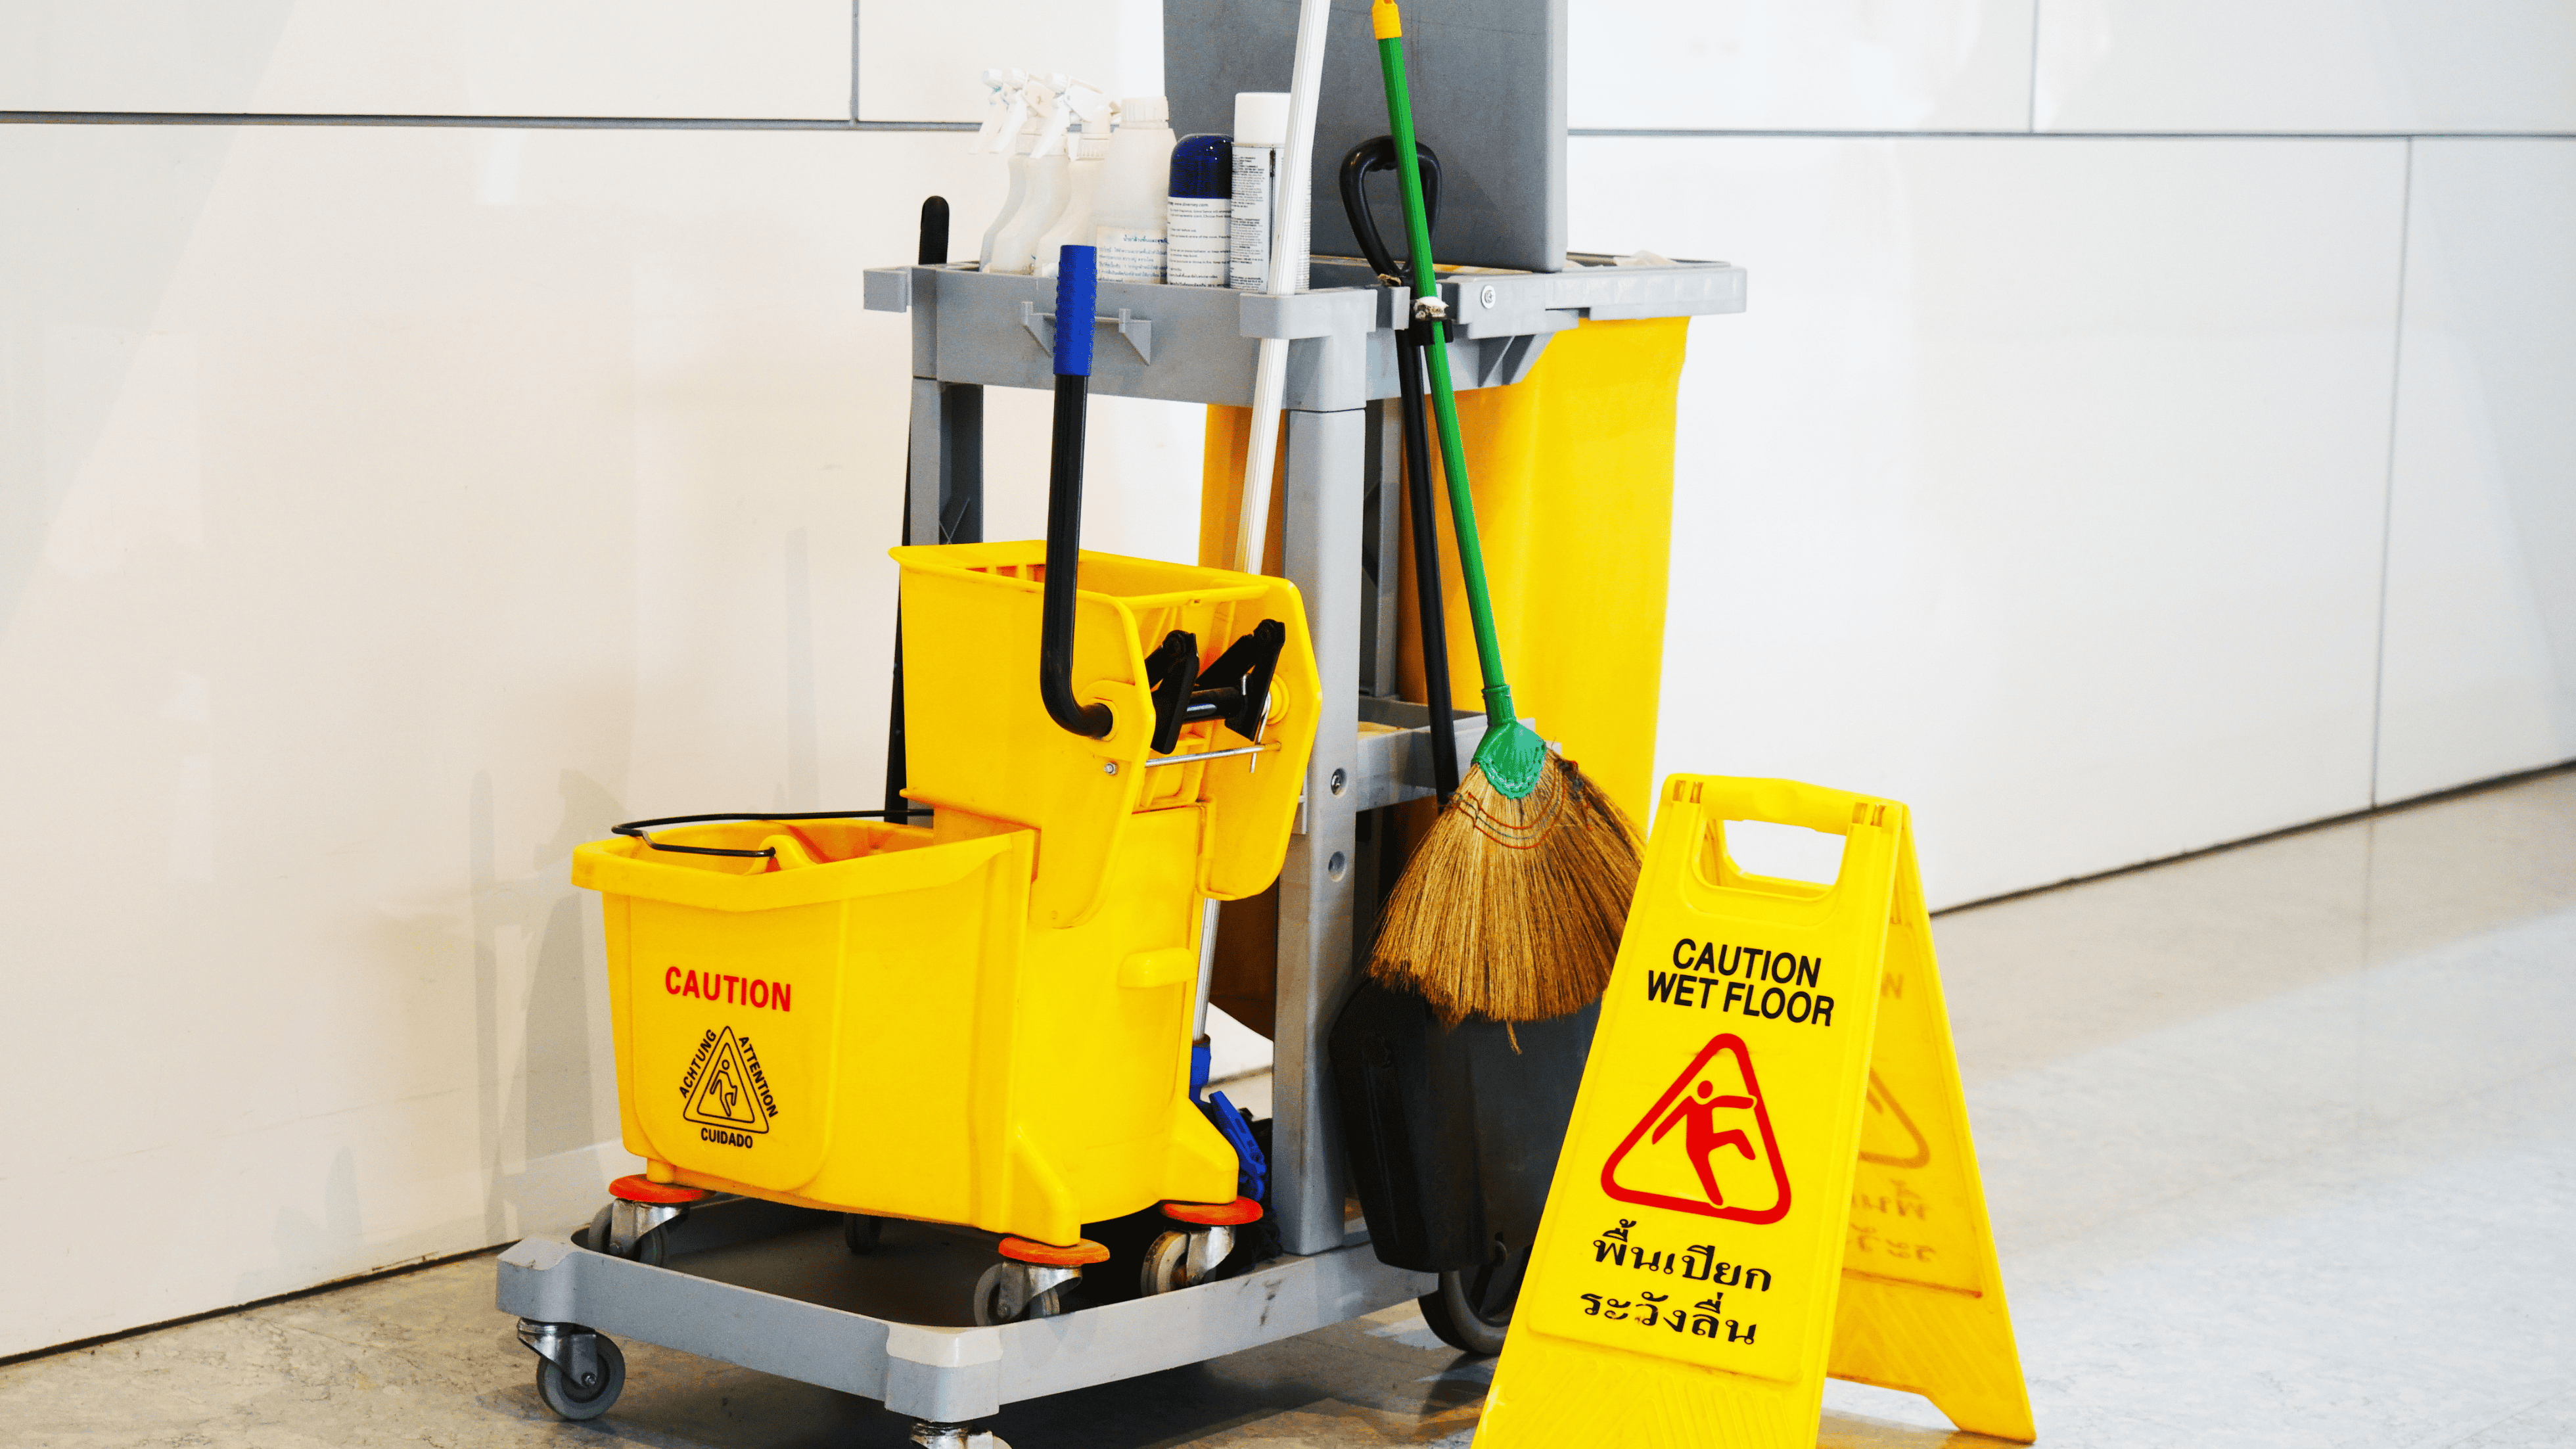 An image of a mop and sweep cart, with a caution sign directly in front of it.